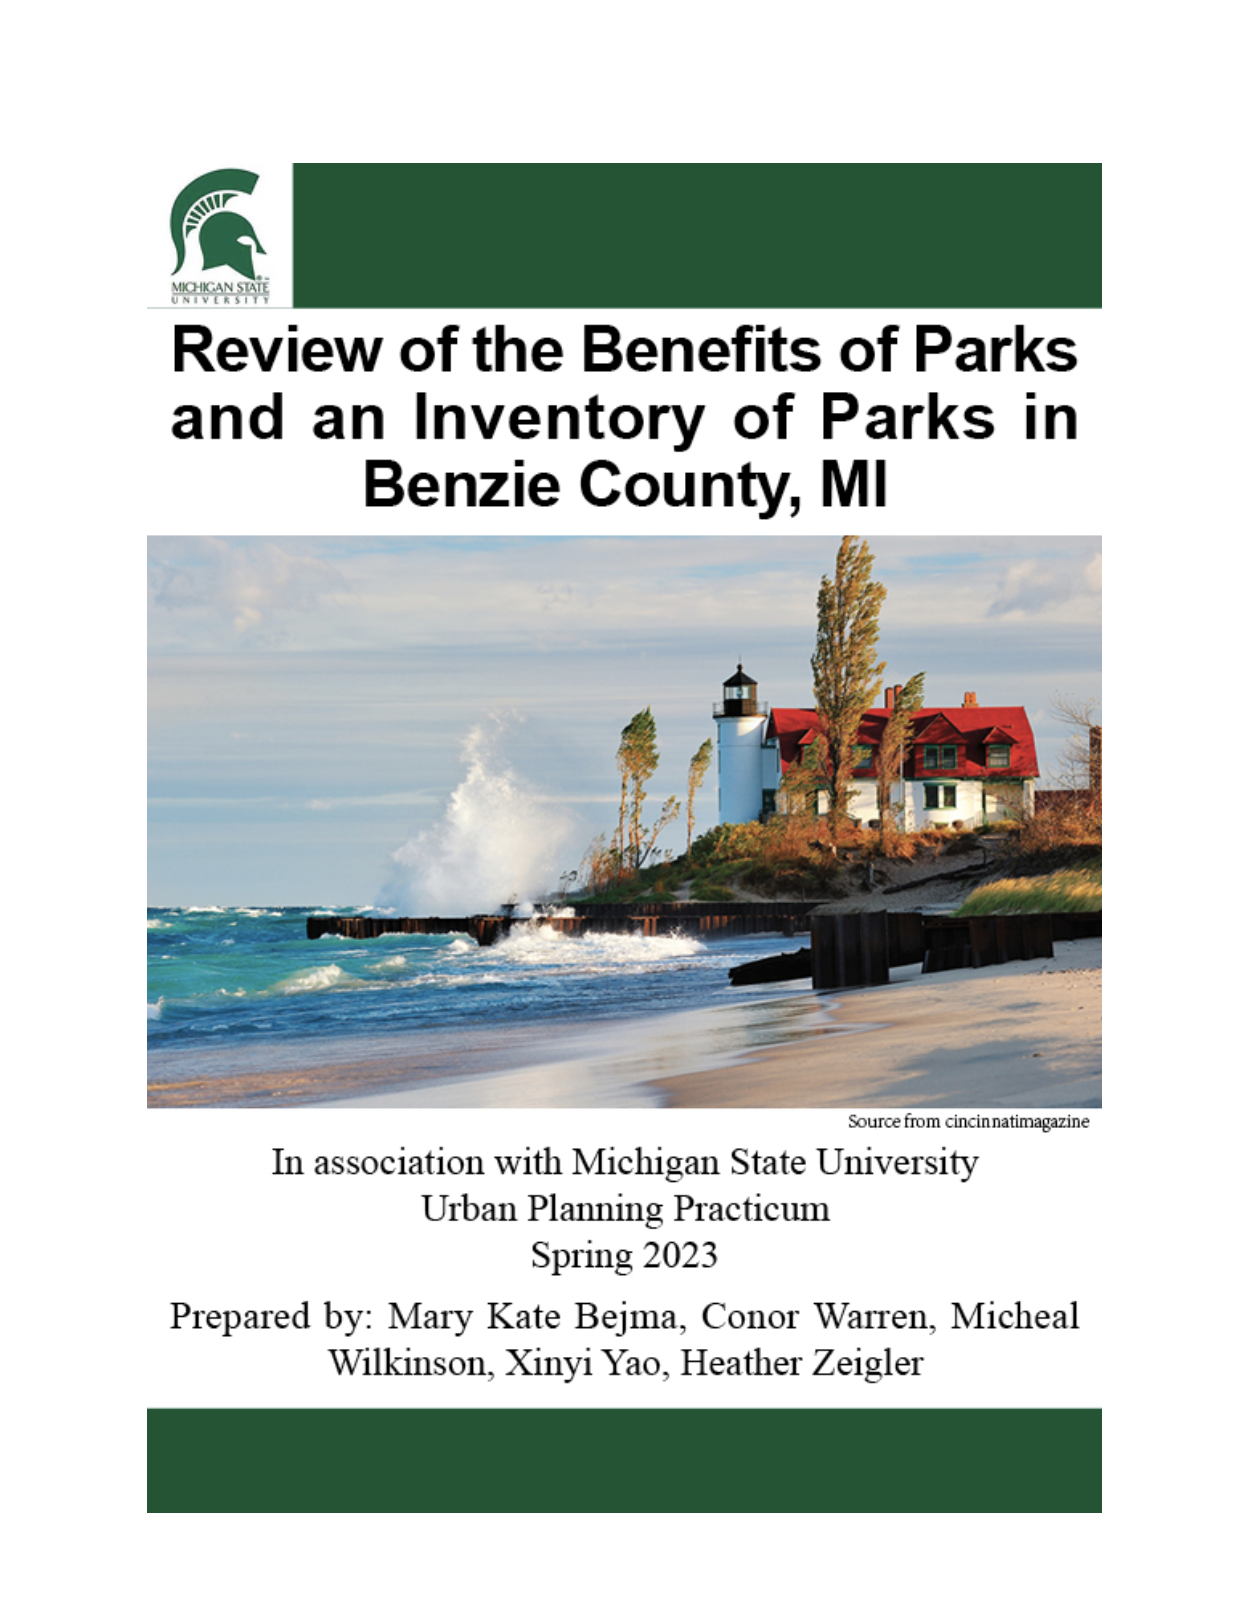 Report for 2023: Review of the Benefits of Parks and an Inventory of Parks in Benzie County, MI